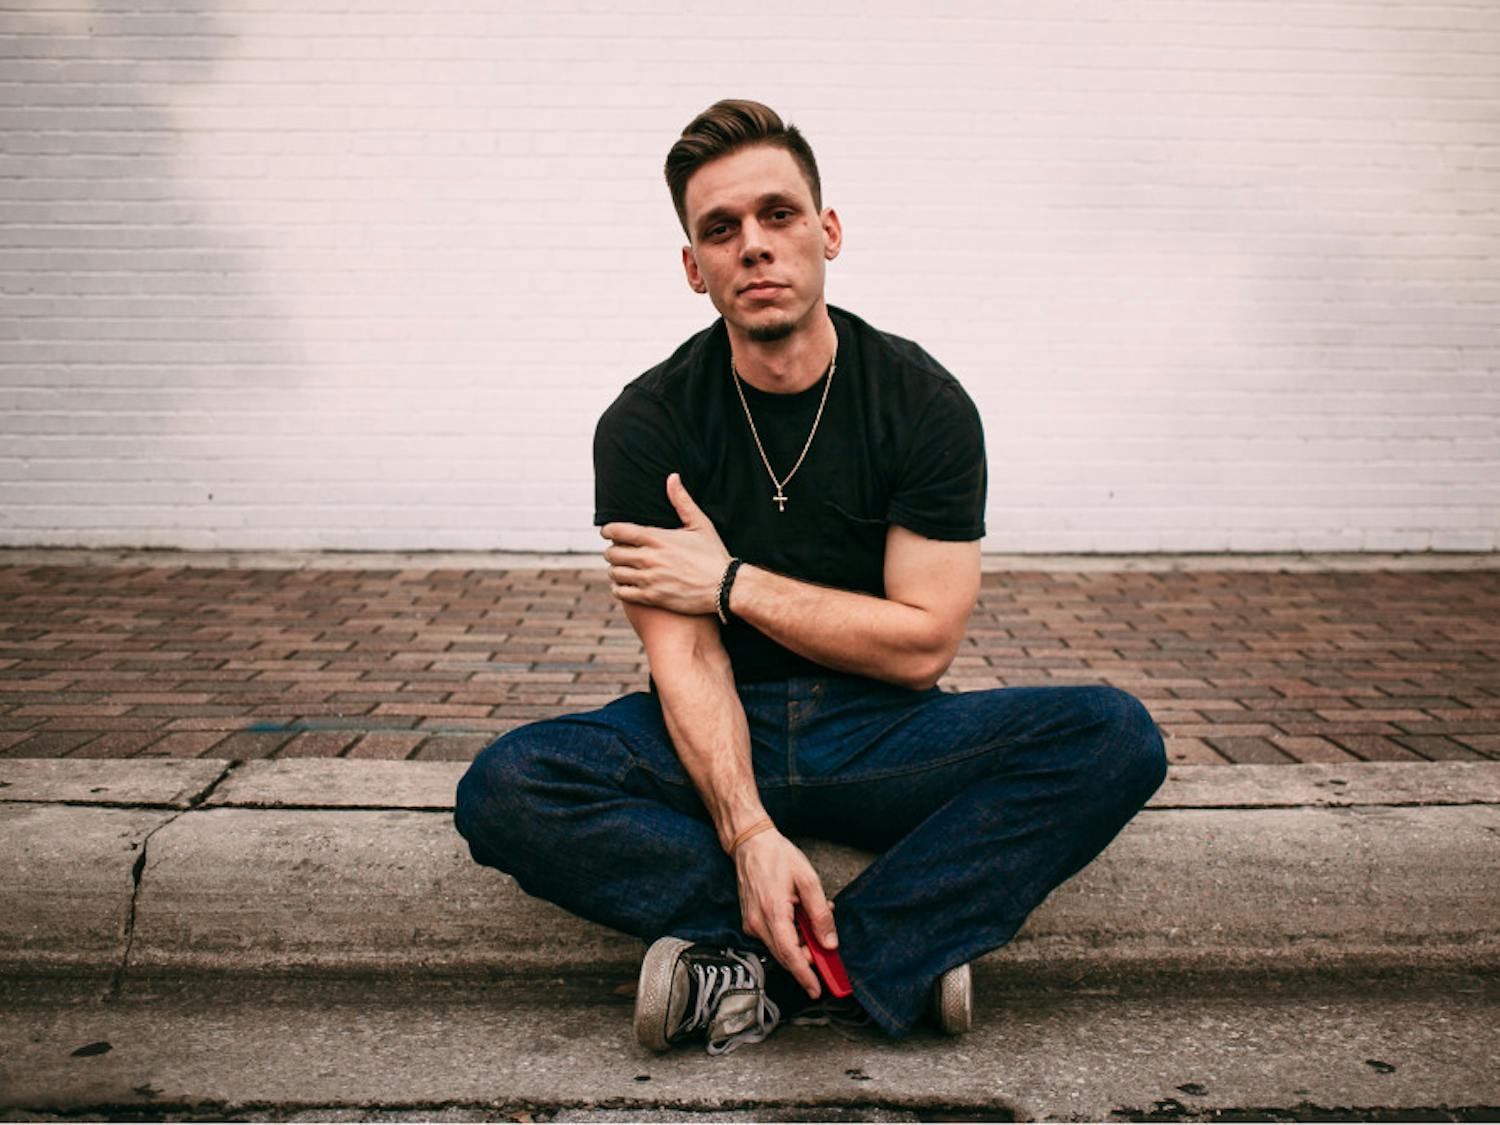 Americana hip-hop artist Danny Pynes is hosting an album release show Friday at The Wooly. Doors open at 8 p.m.